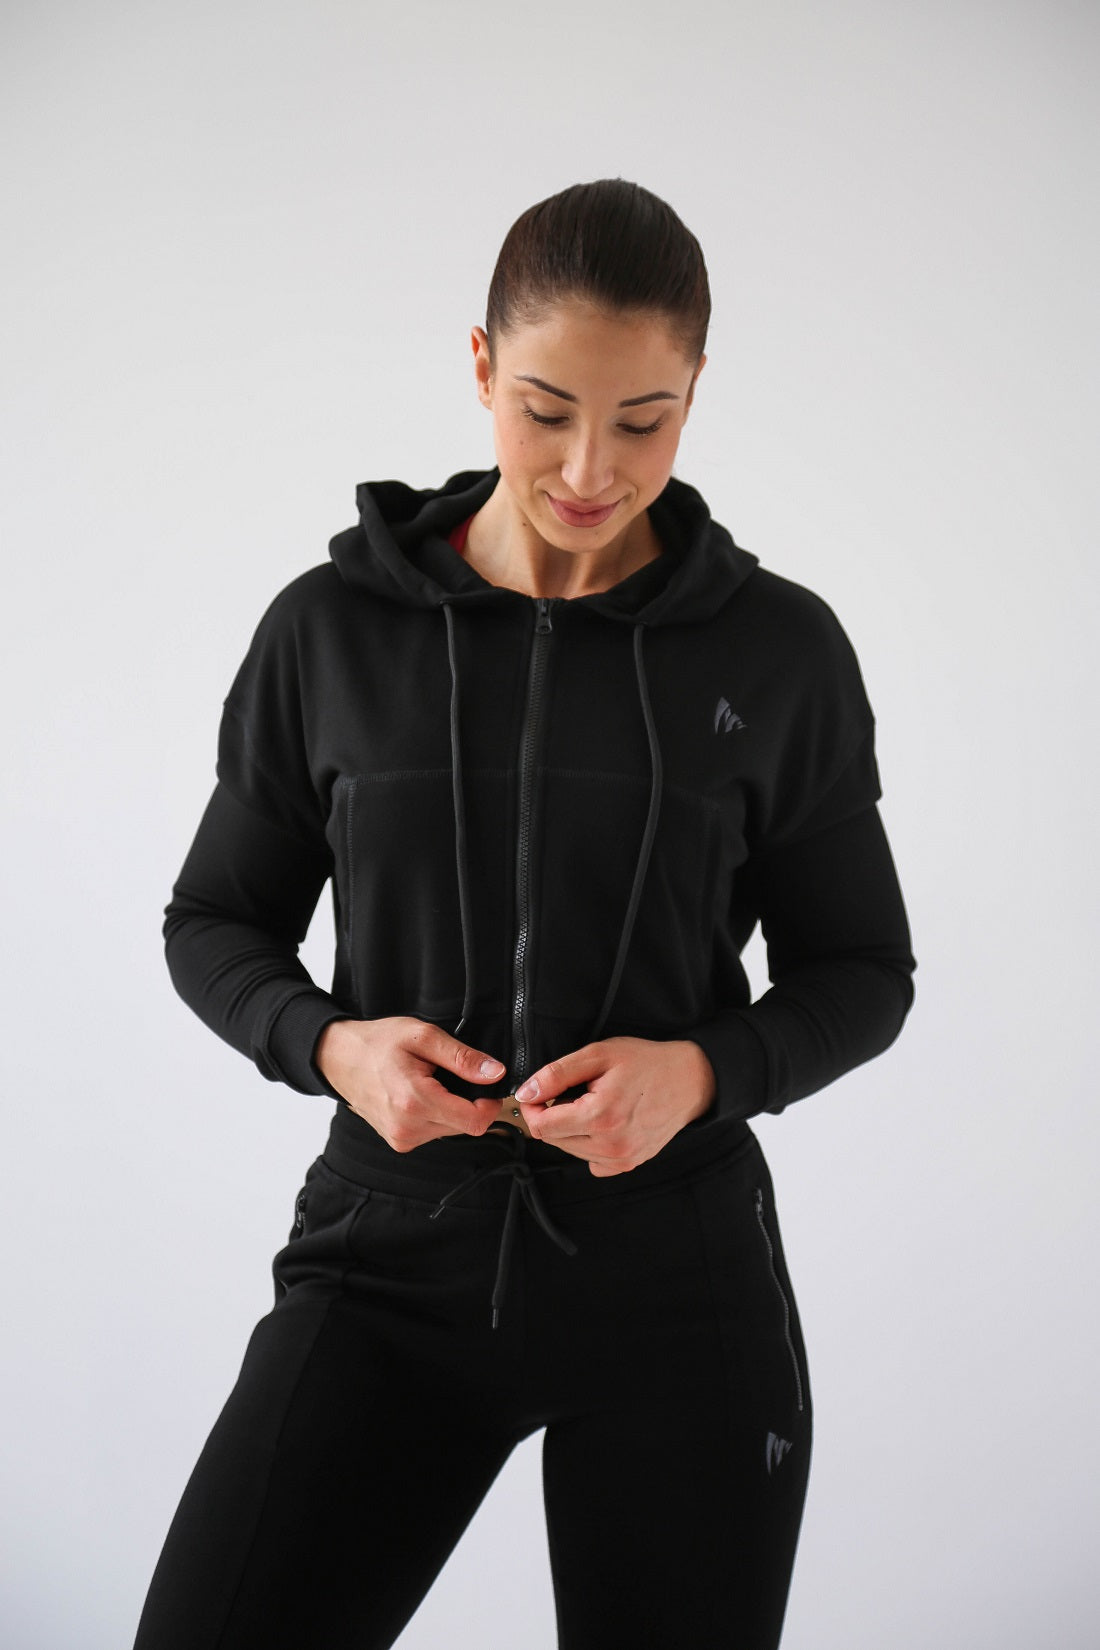 Gymknights Jacke - cropped